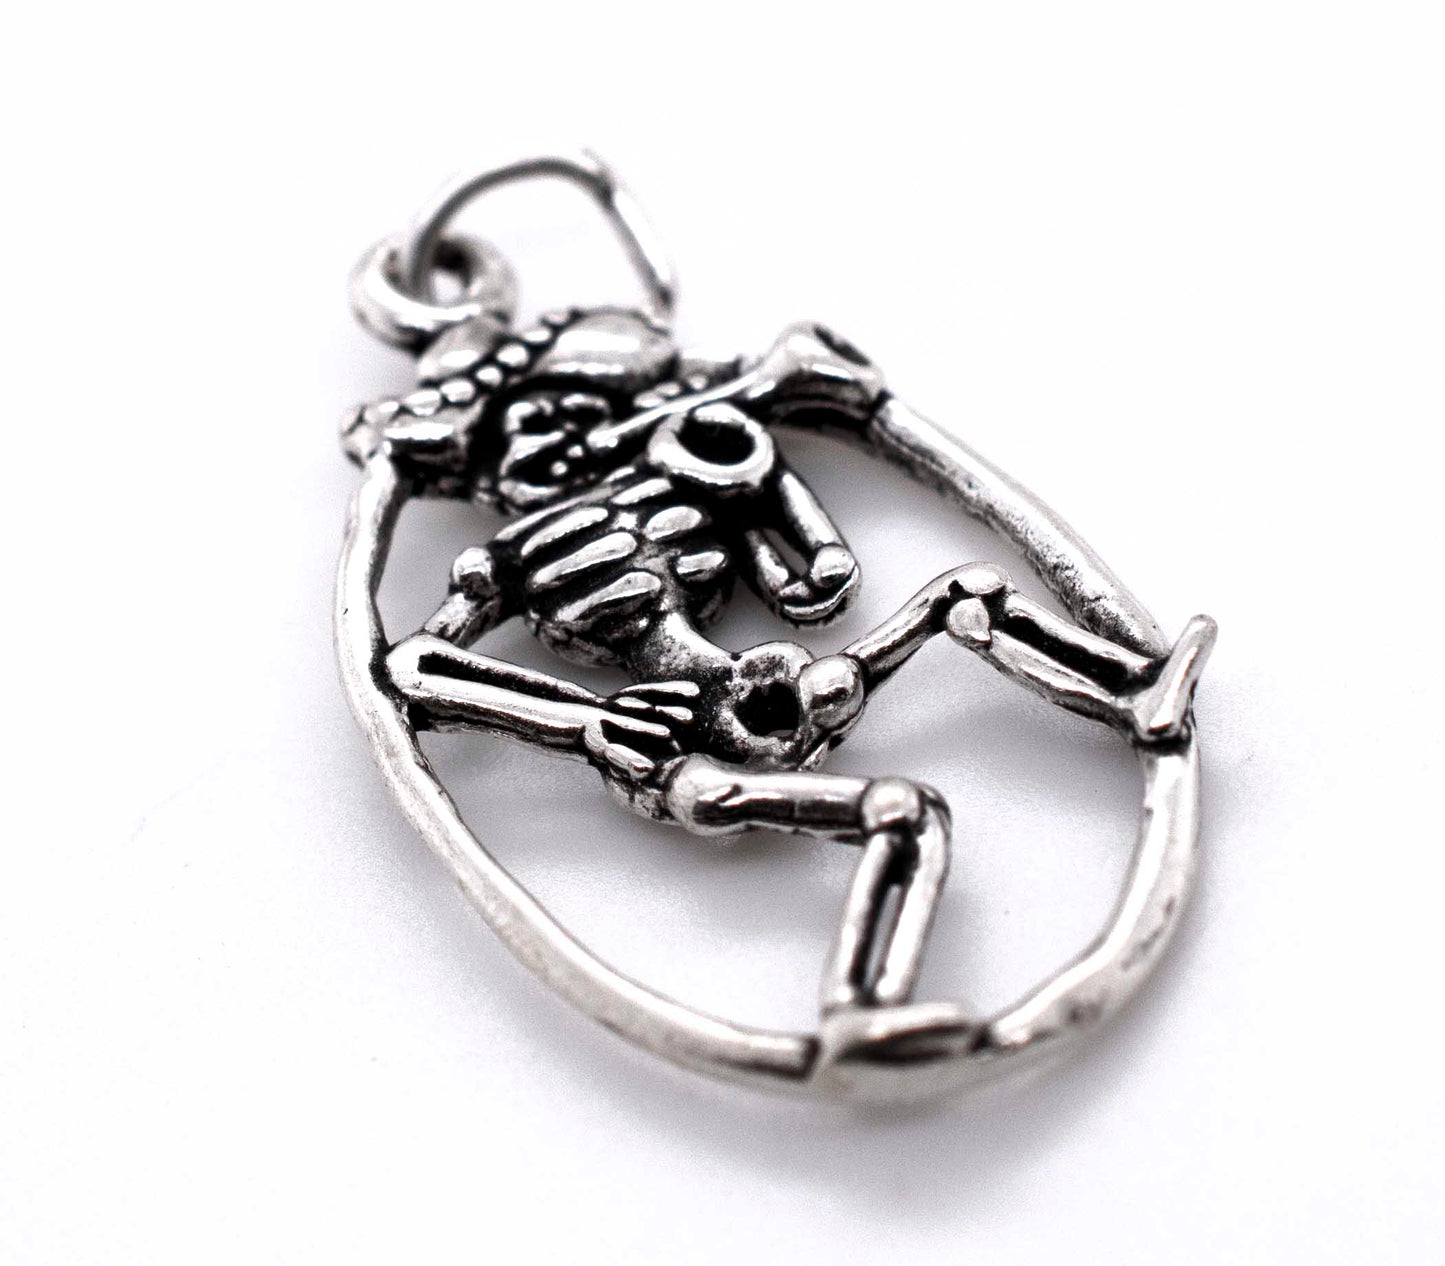 A Super Silver Mariachi Skeleton with Horn Pendant on a white background.